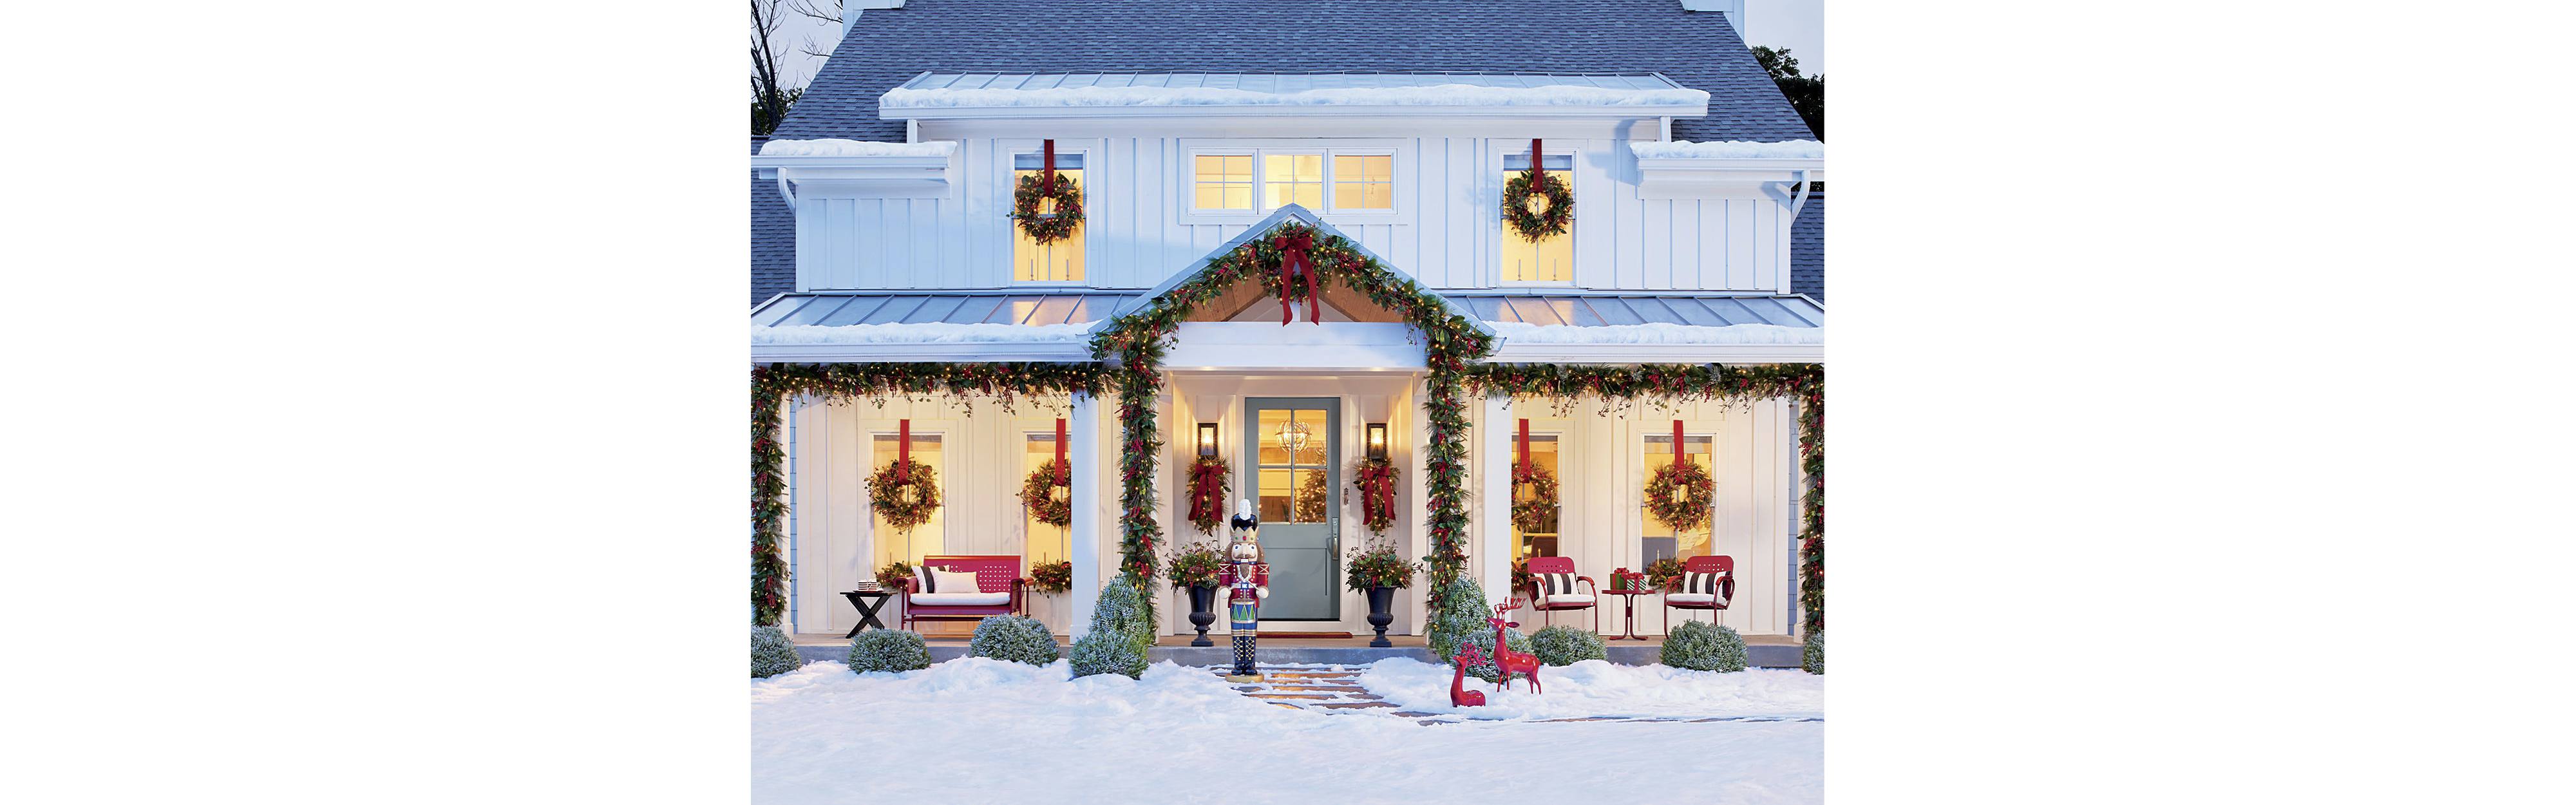 10 porch decoration christmas ideas for a welcoming holiday entrance